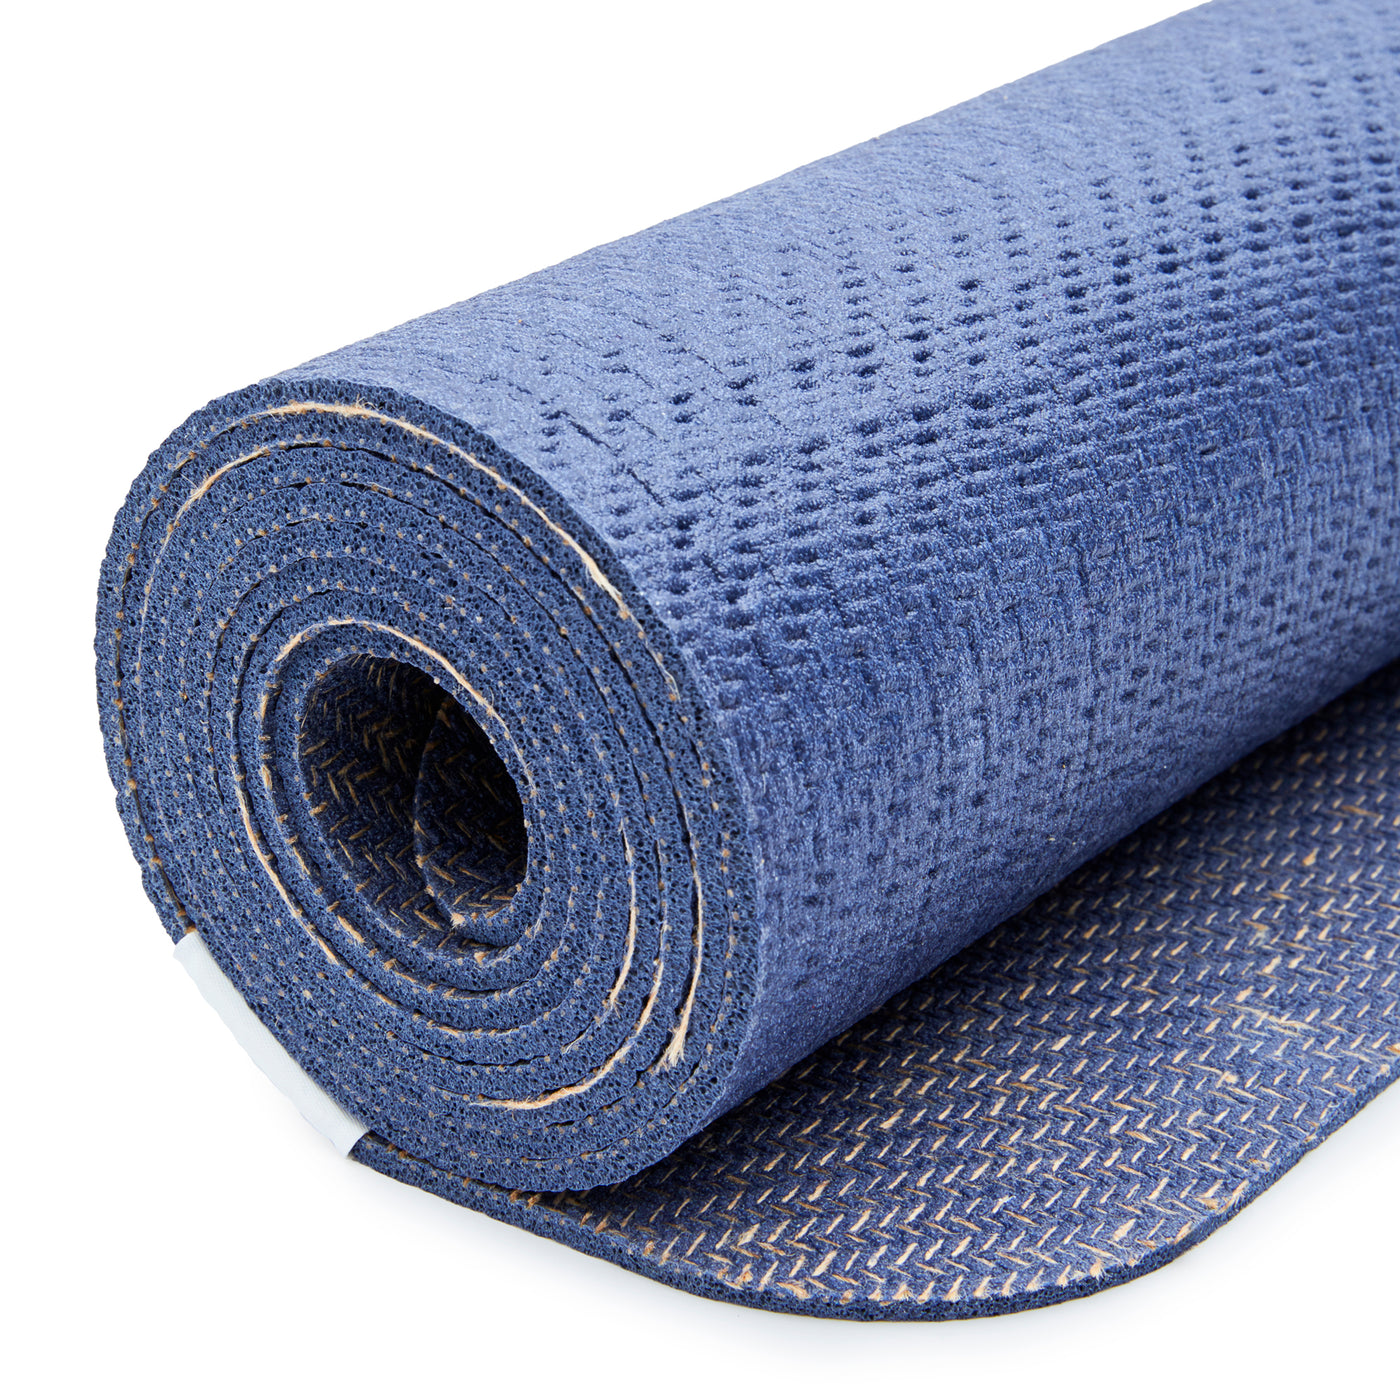 Everyday Yoga Grip Yoga Mat 72 x 26 Inches 5mm at YogaOutlet.com –